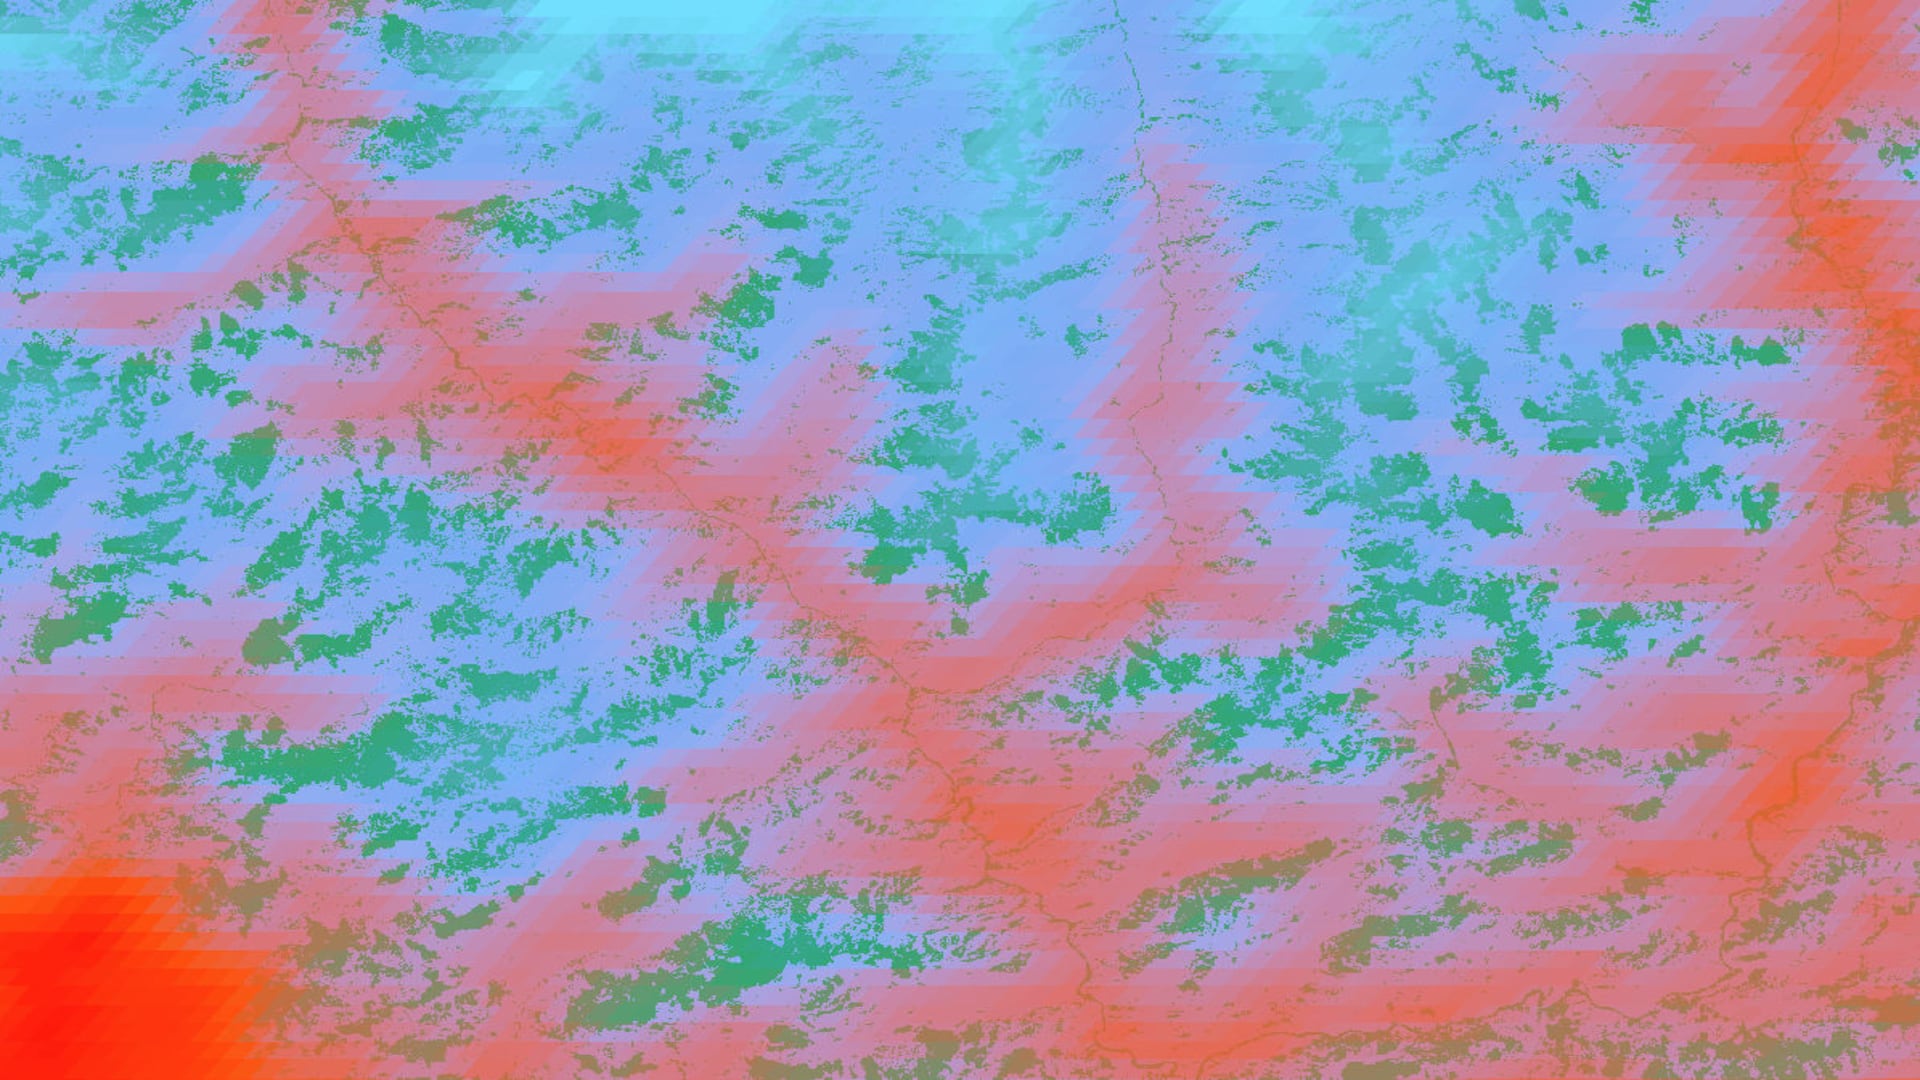 NDVI was processed from fall of 2019 using Landsat 8 Top Of Atmosphere imagery. Annual average land surface temperature (LST) was retrieved from MODIS for 2019. The area around Gelephu in the Southern part of Bhutan is displayed. Light blue represents low LST, red represents high LST, and medium range of LST is indicated by light purple. Healthier vegetation is indicated by green. Examining these variables can help partners in planning suitable elephant ecological corridors.   Keywords: Bhutan, Gelephu, Landsat 8 TOA, MODIS, NDVI, LST​